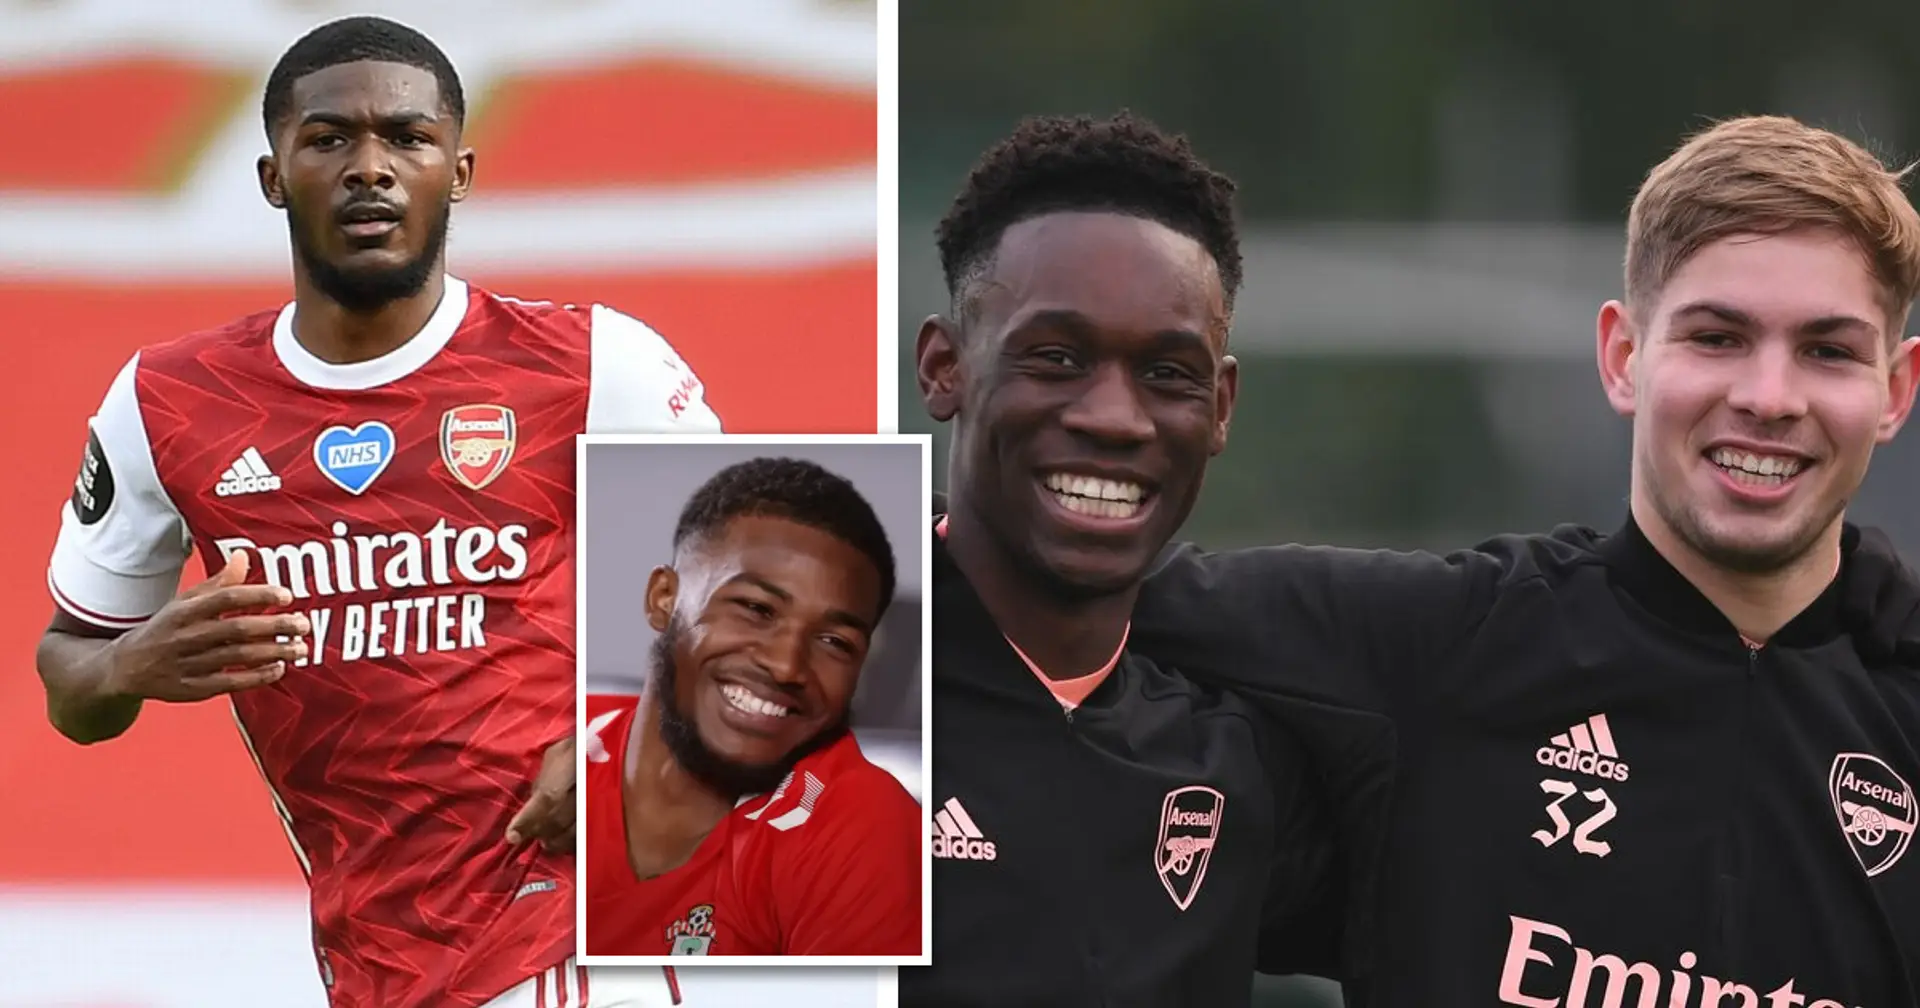 Ainsley Maitland-Niles names his Arsenal teammate as the most cringe